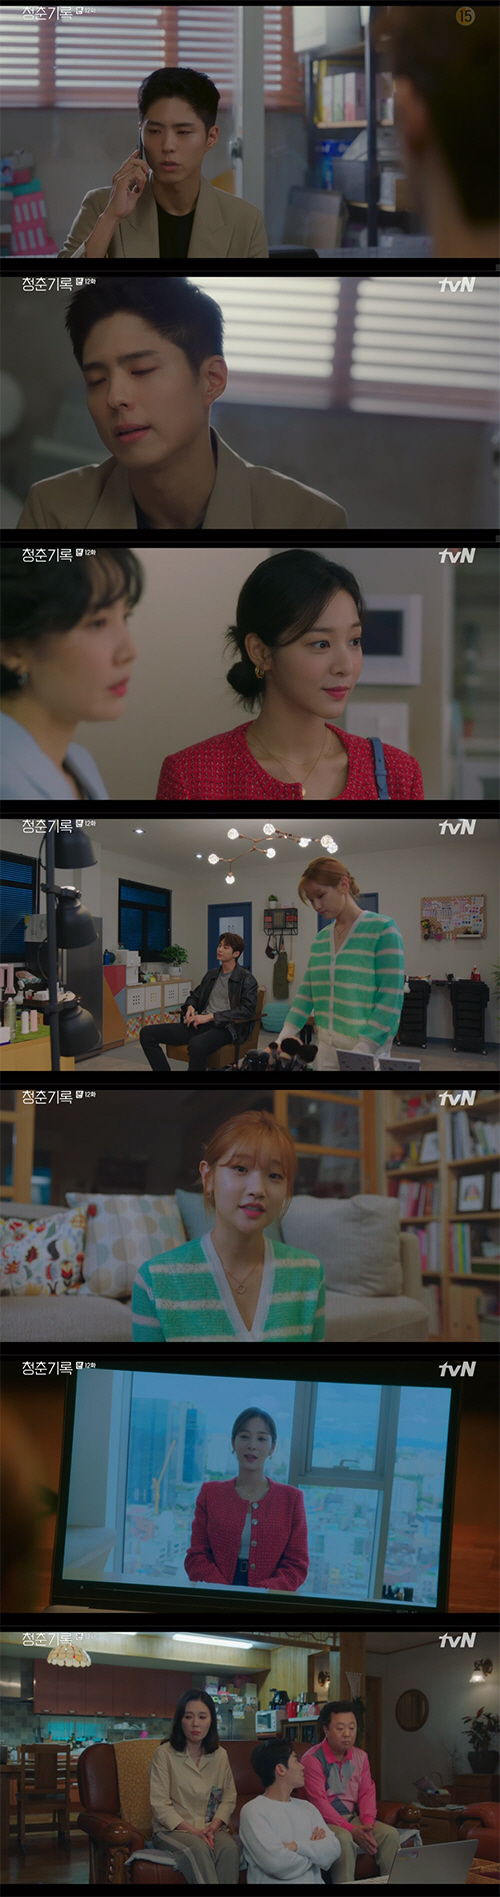 Park Bo-gum and Park So-dam are clouded by the love front.In the TVN Monday drama Record of Youth broadcast on the 13th, Park Bo-gum and Park So-dam relieved the rumors and received help, and a little cloudy clouds came to the front of affection.Sa Hye-joon said to Won Hae-hyo, I have help to receive and I do not have help. But Jias help is the latter.Won Hae-hyo was angry and said, If you were before, you would not do it.Won Hae-hyo said, Youre so busy these days and Hannah Jeter and Kim Jin-woo are a couple.Sa Hye-joon asked, When did you know you were dating Jinwoo and Hannah Jeter? Won Hae-hyo said, Did you know?When Jung Jia met with Won Hae Hyo, I have to be good with Hye Jun.I do not think you are good with Jung Ha. Won Hae Hyo said firmly, Even if you meet Hye Jun and you, you are not a person who eats anything. Han Ae-sook (Ha Hee-ra) was suffering from searching for bad articles about her son. Every time I see it, I feel feverish.I do not think the people of the station are stupid and give it to me. He showed anger at Lee Kyoung-mi (Park Sung-yeon).Lee Kyoung-mi advised Han Ae-sook, The representative is too bad; Hye-joon should move to a big company, and the company name is not Champon or Chinese house.Kim Yi-young (Shin Ae-ra) tells her daughter Hannah Jeter (Joe Yu-jung) about dating Kim Jin-woo (Kwon Soo-hyun), saying, When I get married, I have to live only one person.And just be good at contraception - just come home playing, he said.One Hannah Jeter was angry, Why do you claim ownership? And Kim Yi-young took off the car key, saying, Come to know how hard it is to meet without a future.I thought I could not beat my mother, said Hannah Jeter, who met Kim Jin-woo, and Kim Jin-woo said, Love is fantasy. Marriage is reality.I dont intend to move on from fantasy, because I love you, she said.Jung Jia went to Champon Enter and met Sa Hye-joon. Sa Hye-joon said coolly, I do not want you to appear in my life. Jung Jia said, I knew I could not stay as a man.Lets get a little comfortable now, he said.Jung Jia said, I was so happy when you went well. Im the one whos ruining you. I dont want anyone else to ruin you.I do not owe you anymore, he said, and said why he helped.Park Do-ha (Kim Gun-woo) went to Lee Tae-soos office and began to suspect, Its strange to see, there are too many Hae-hyo followers.Park Do-ha said, I feel uncomfortable with the self-esteem of the body from Haehyo.Won Hae Hyo went to the shop of Ahn Jung-ha and said, I received the contact information of the woman who talked about it at that time.But An Jeong-ha refused, Theres an airing this evening.Won Hae-hyo asked, Why do not you say that you are solid? And asked about the difficult times these days, and he showed his belief in his boyfriend, Sa Hye-joon, saying, Its hard but I will tell you when.Sa Hye-joon met Kim Jin-woo and drank and said, I fought Haehyo because of the Jia interview. Kim Jin-woo worried, But what if you see the interview?I have an interview with Jia sister alone, said Won Hae-hyo, who returned to a stable house. I do not feel like talking to you, I have to see Love Live now.Im sorry, but I have to meet you to talk about it, said Sa Hye-joon, who called me to Confession under the title of Stable Love Live!I reconnected to the stable Love Live!, which hung up, and said, Yes, you are actually my boyfriend.In the end, Kim Jin-woo and Sa Hye-joon, who drank alcohol, came to the fans and asked, Can you take a picture together?But fans posted on SNS, Sa Hye-joon is drinking with his boyfriend.Kim Jin-woo, who met Won Hae-hyo, asked, How were you? Won Hae-hyo said, How did you think about dating Hannah Jeter? But you did not think to talk to me.Lets get one shot, he said, but he was angry.Sa Hye-joon said, Mom did not forget that I was a child when I was a child.Lingnan (Park Soo-young), who saw this, was surprised that he made all this a year, and Han Ae-sook cried when he saw his sons hard-earned money and said, I do not want to receive this money.I did not date Charlie Chung, right?I have to make reasonable doubts, and Lingnan eventually called Lee Min-jae (Shin Dong-mi) and asked, I called because I was curious, but when did I have a manager contract with Hye Jun?Lee Min-jae said, The time has passed to write the contract, but if you do not want each other in the contract, you will be terminated. But what did Hye-joon talk about the contract?After breaking up with Kim Jin-woo, Sa Hye-joon went to the house of Ahn Jeong-ha.I fell in love with my girlfriend and told us that it was a small thing, and Haehyo introduced me to Top Star Actor. I want to be the persons exclusive. Sa Hye-joon, who listened to this story, said, I will be pushed by Hae-hyo. Sa Hye-joon asked, Have you seen the Jia interview? Stable I felt bad.But why do not you discuss this with me when it happens? Why do I make me think about various things alone? You make your anger calm, I want to show you only good things, said Sa Hye-joon, and said, I am a child, thats what my parents are talking about.Sa Hye-joon said, If I show pain to my loved ones, my self-esteem falls. He said, The people you love are rather frustrated if you hide.In addition, Lingnan, the arm of Sa Hye-joon, asked Lee Min-jae, who came to his house early in the morning, Did you sue Sa Hye-joon? Lee Min-jae said, The first evil was filed.Sa Hye-joon told Lingnan, I know my dad is worried about my work, but Min-jae is my person. Please do not hurt me.For the entertainer who connected with Won Hae Hyo, he was waiting for the bus alone while the rain was going to the local filming location, and he called Sa Hye Jun, but Sahejun, who boarded the plane for an overseas fan meeting, did not receive the phone call.At this time, Won Hae Hyo appeared in front of the stable and handed the umbrella.There was no stable word when I went home in the car of Won Hae Hyo, and I was told to bring Won Hae Hyo to the house.